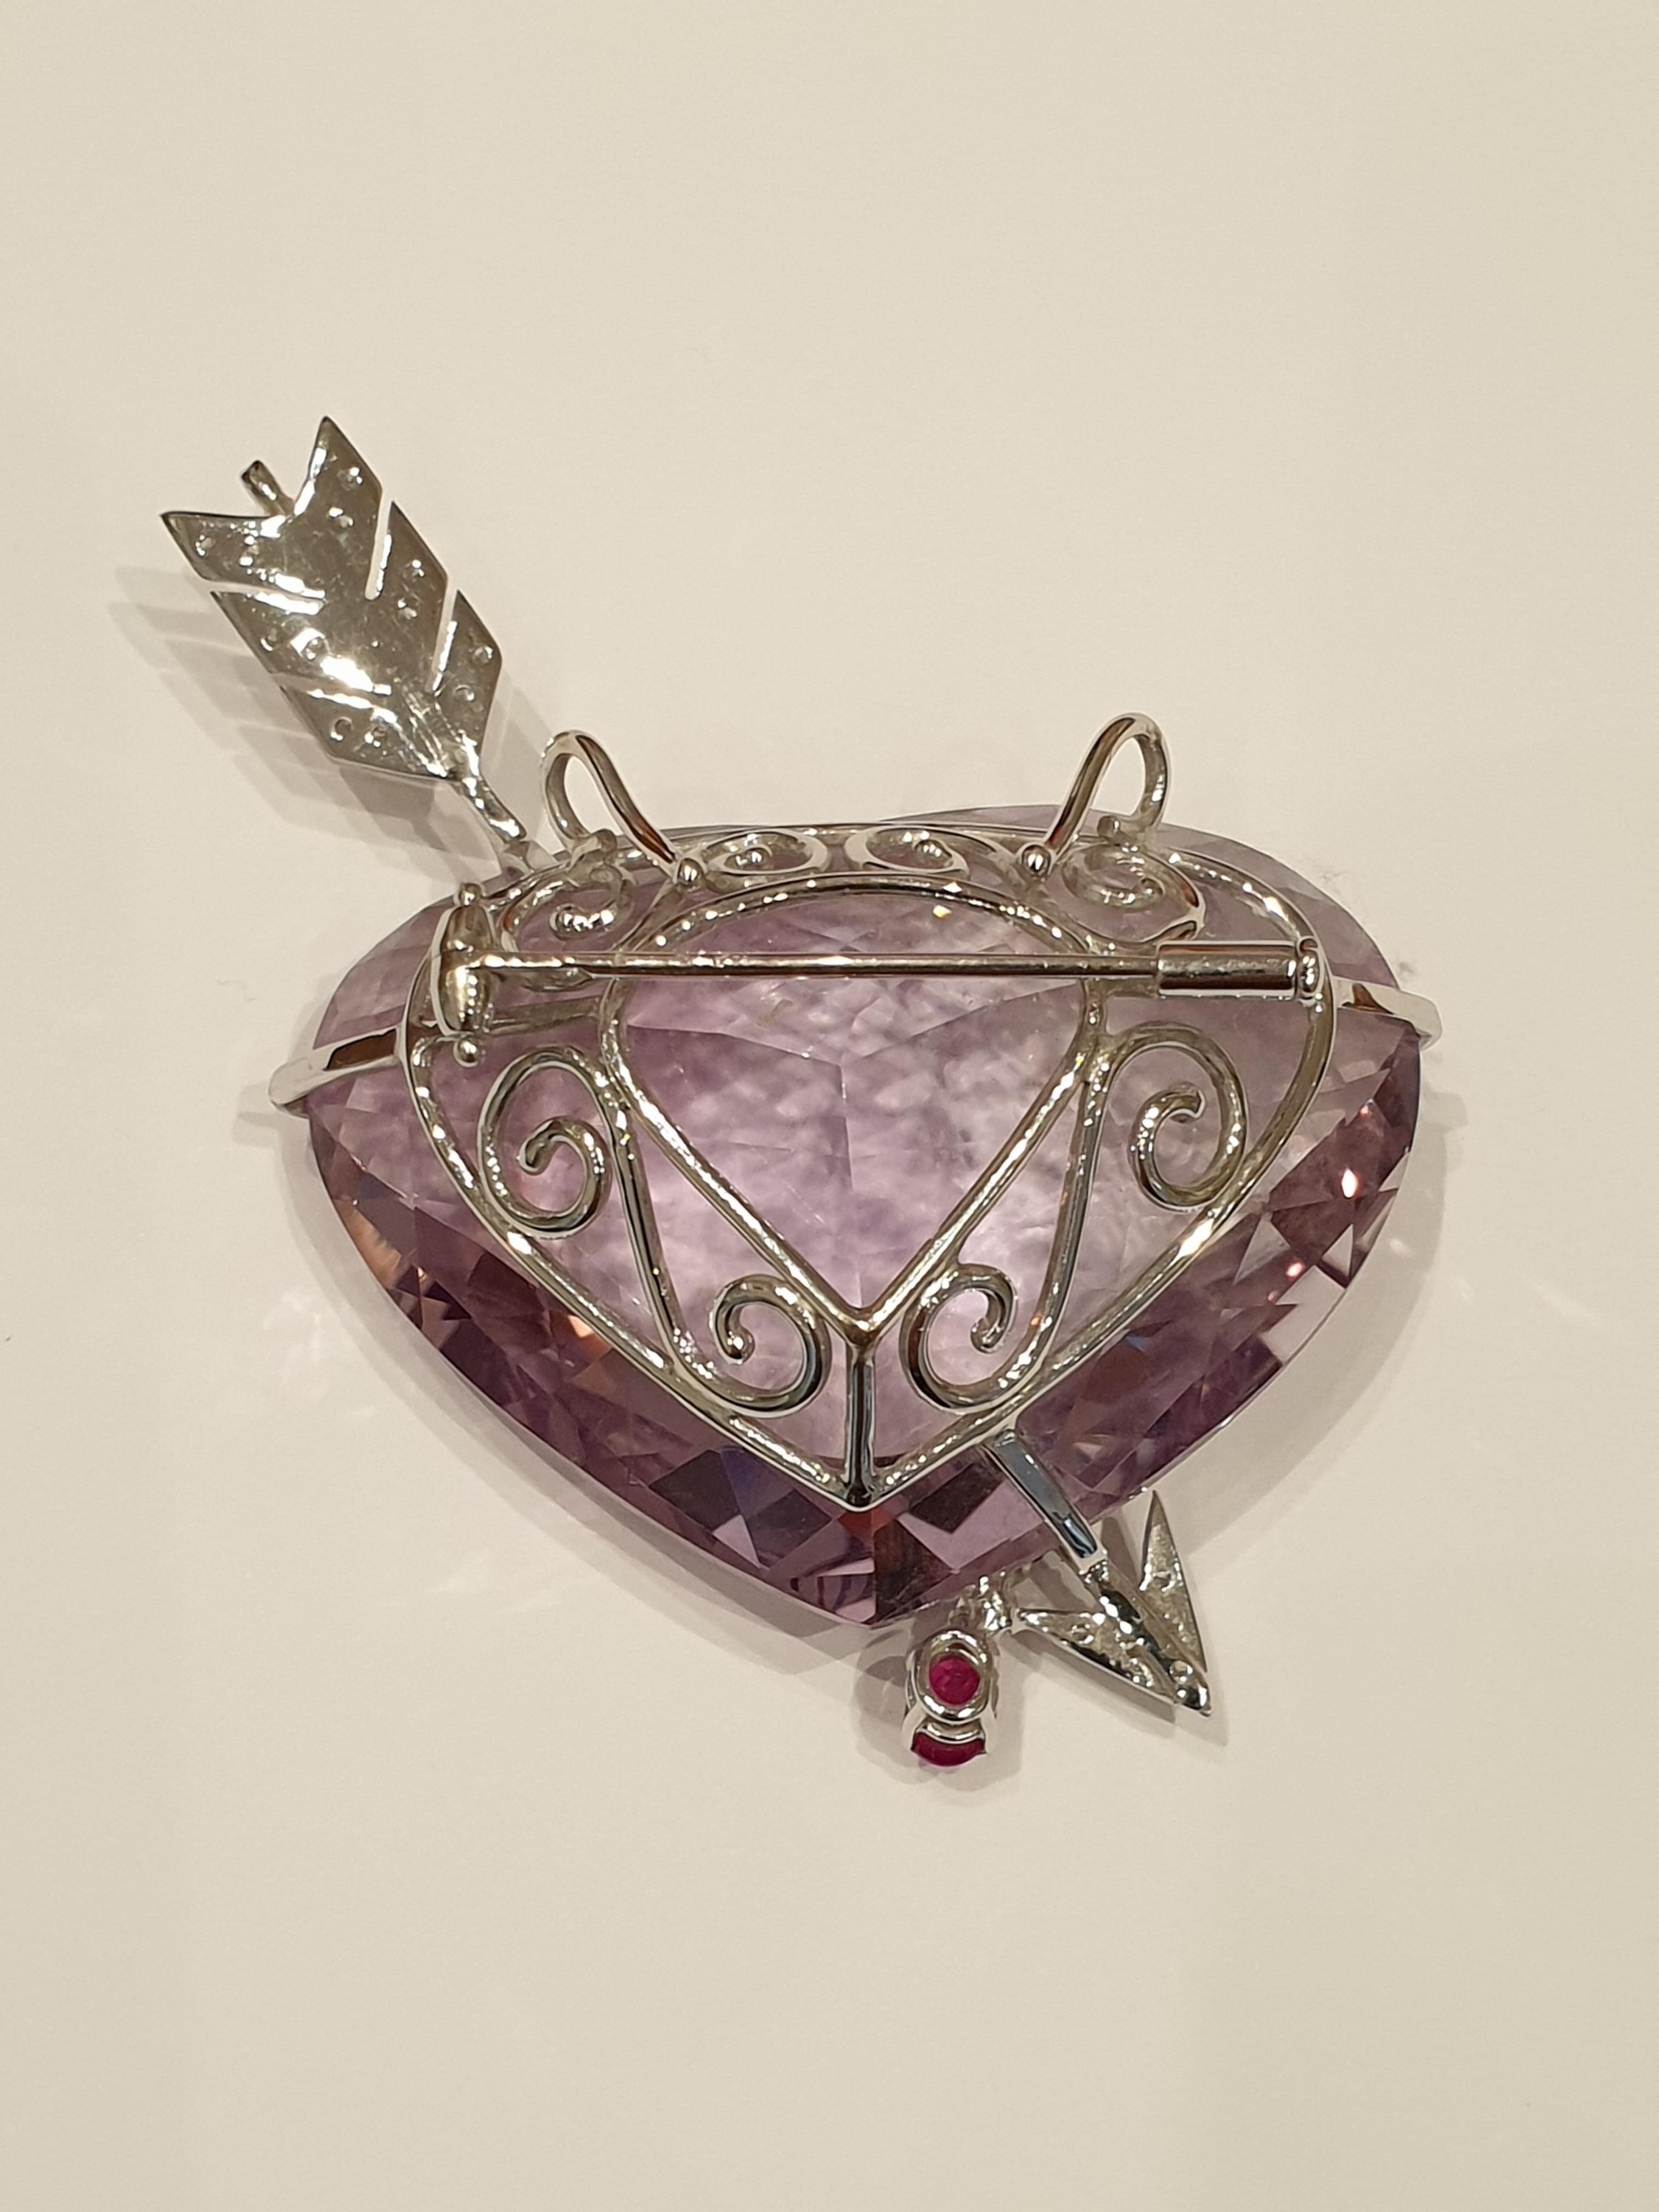 Brilliant Cut Amethyst Gold Brooch in the Form of a Pierced Heart with Diamonds and Rubies